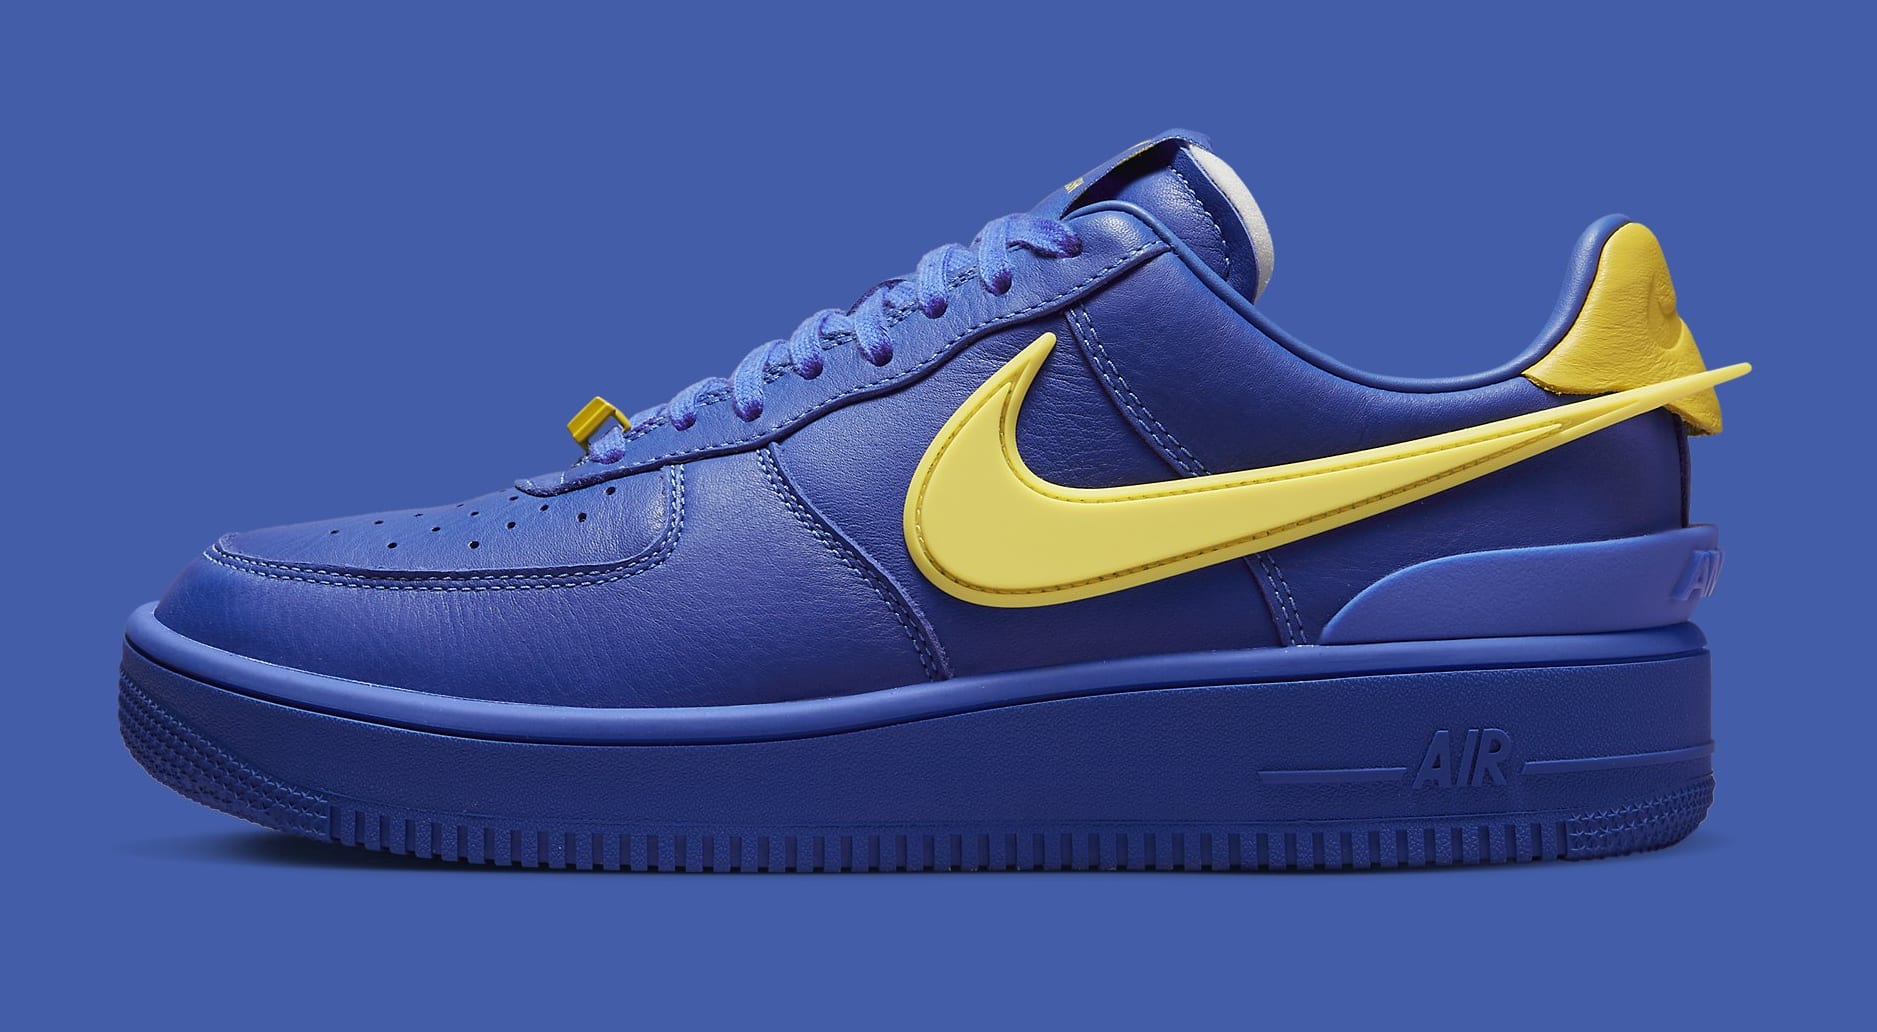 Ambush x Nike Air Force 1 Low Collaboration Release Date | Sole Collector